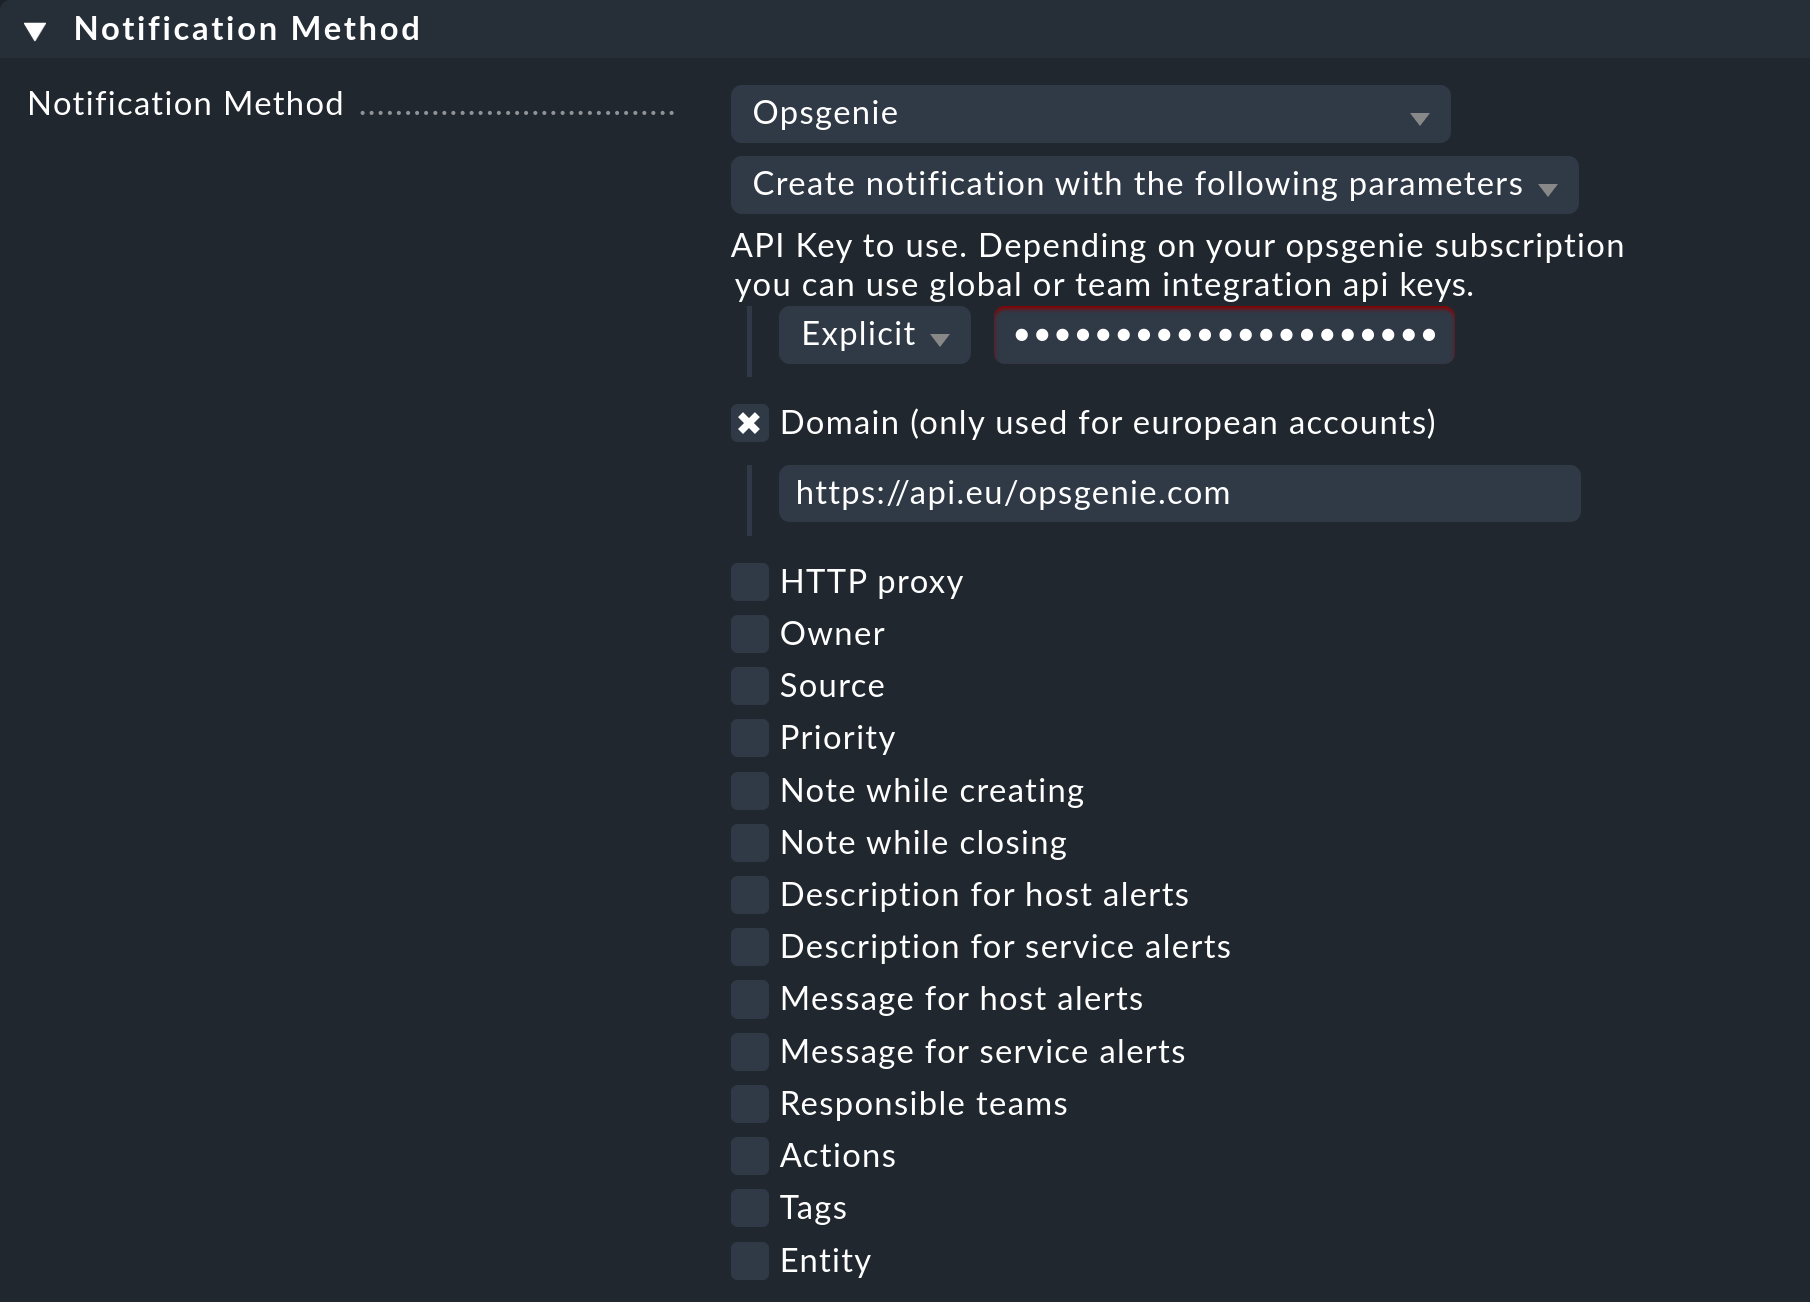 The notification method settings for Opsgenie.